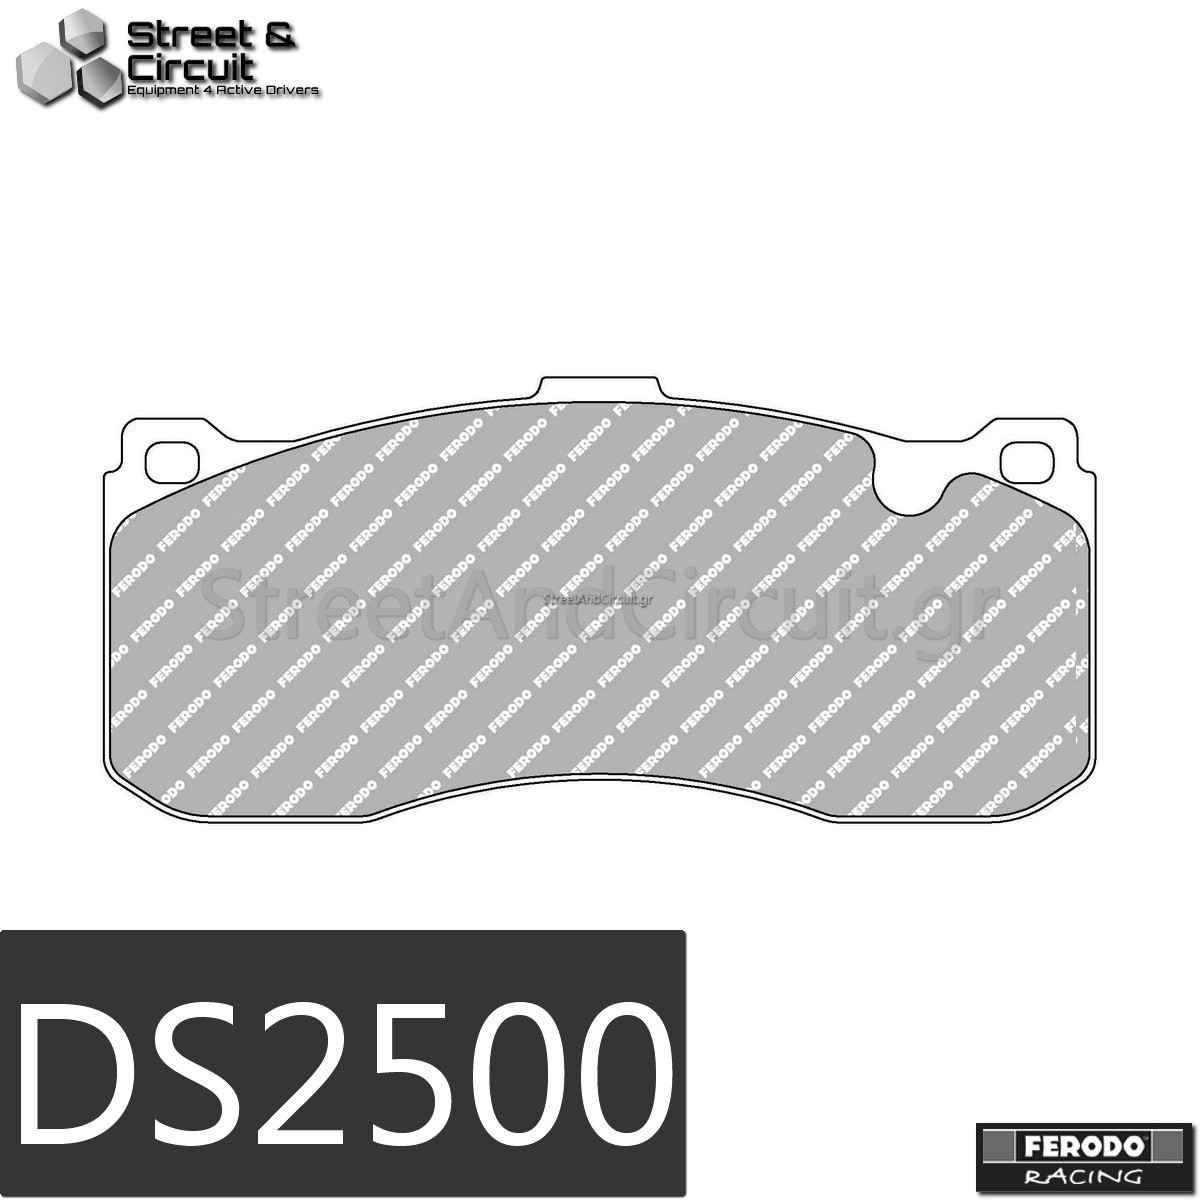 325d 3.0 (E90) - sports package 3 (E90) 2005-2012 (FRONT), Brake System: BREMBO - Ferodo Racing Τακάκια *DS2500*